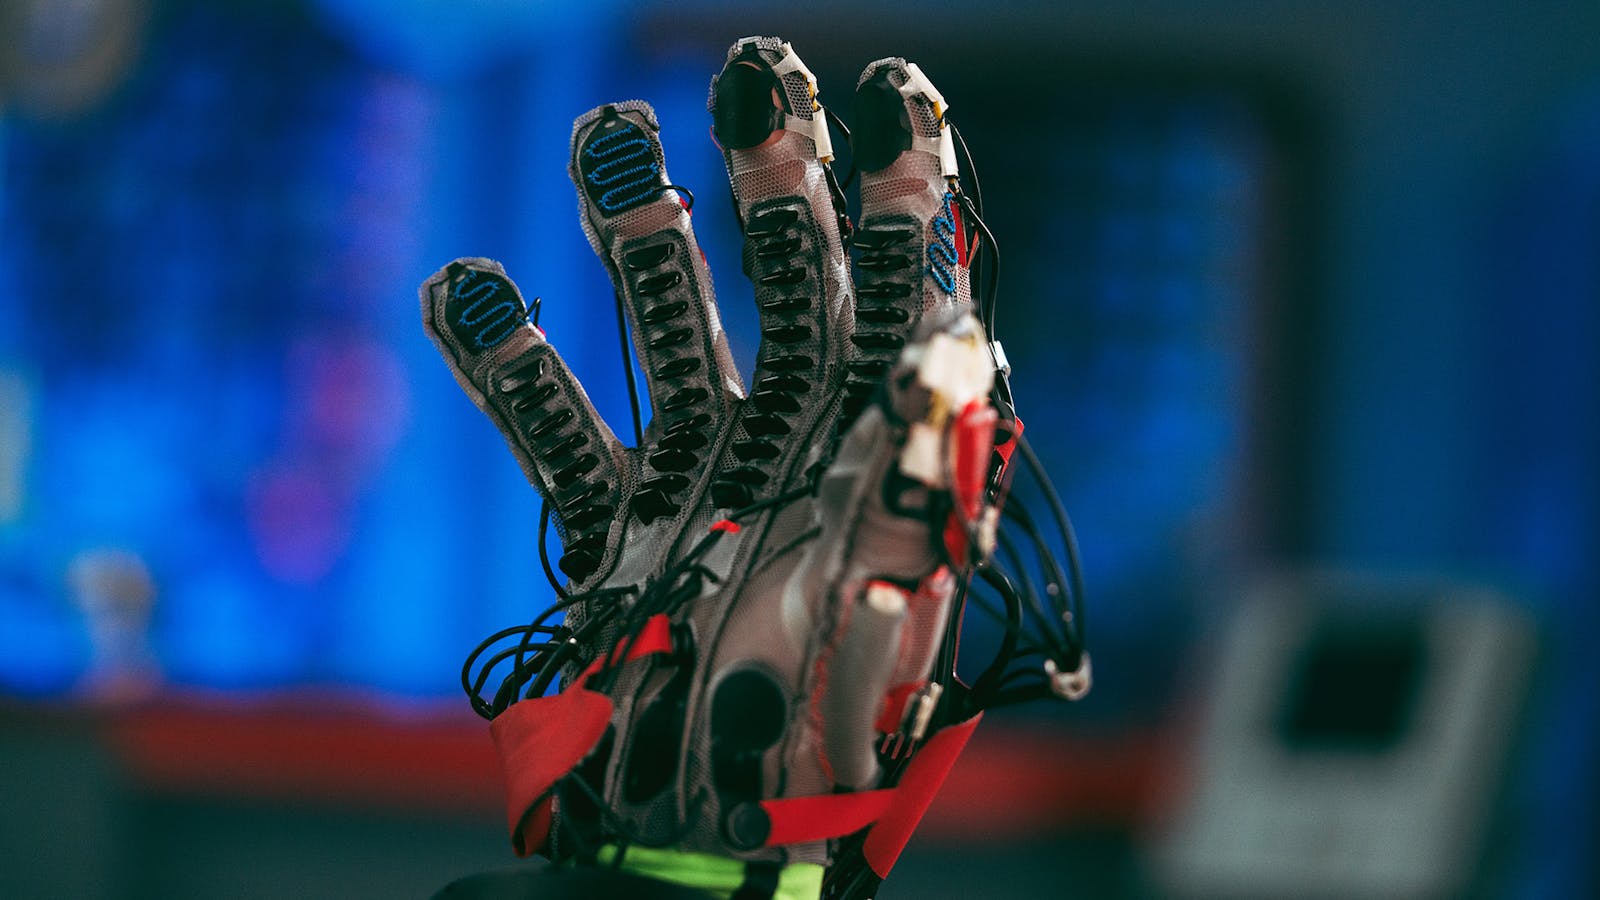 A look at the latest haptic glove prototype from Reality Labs. Credit: Meta